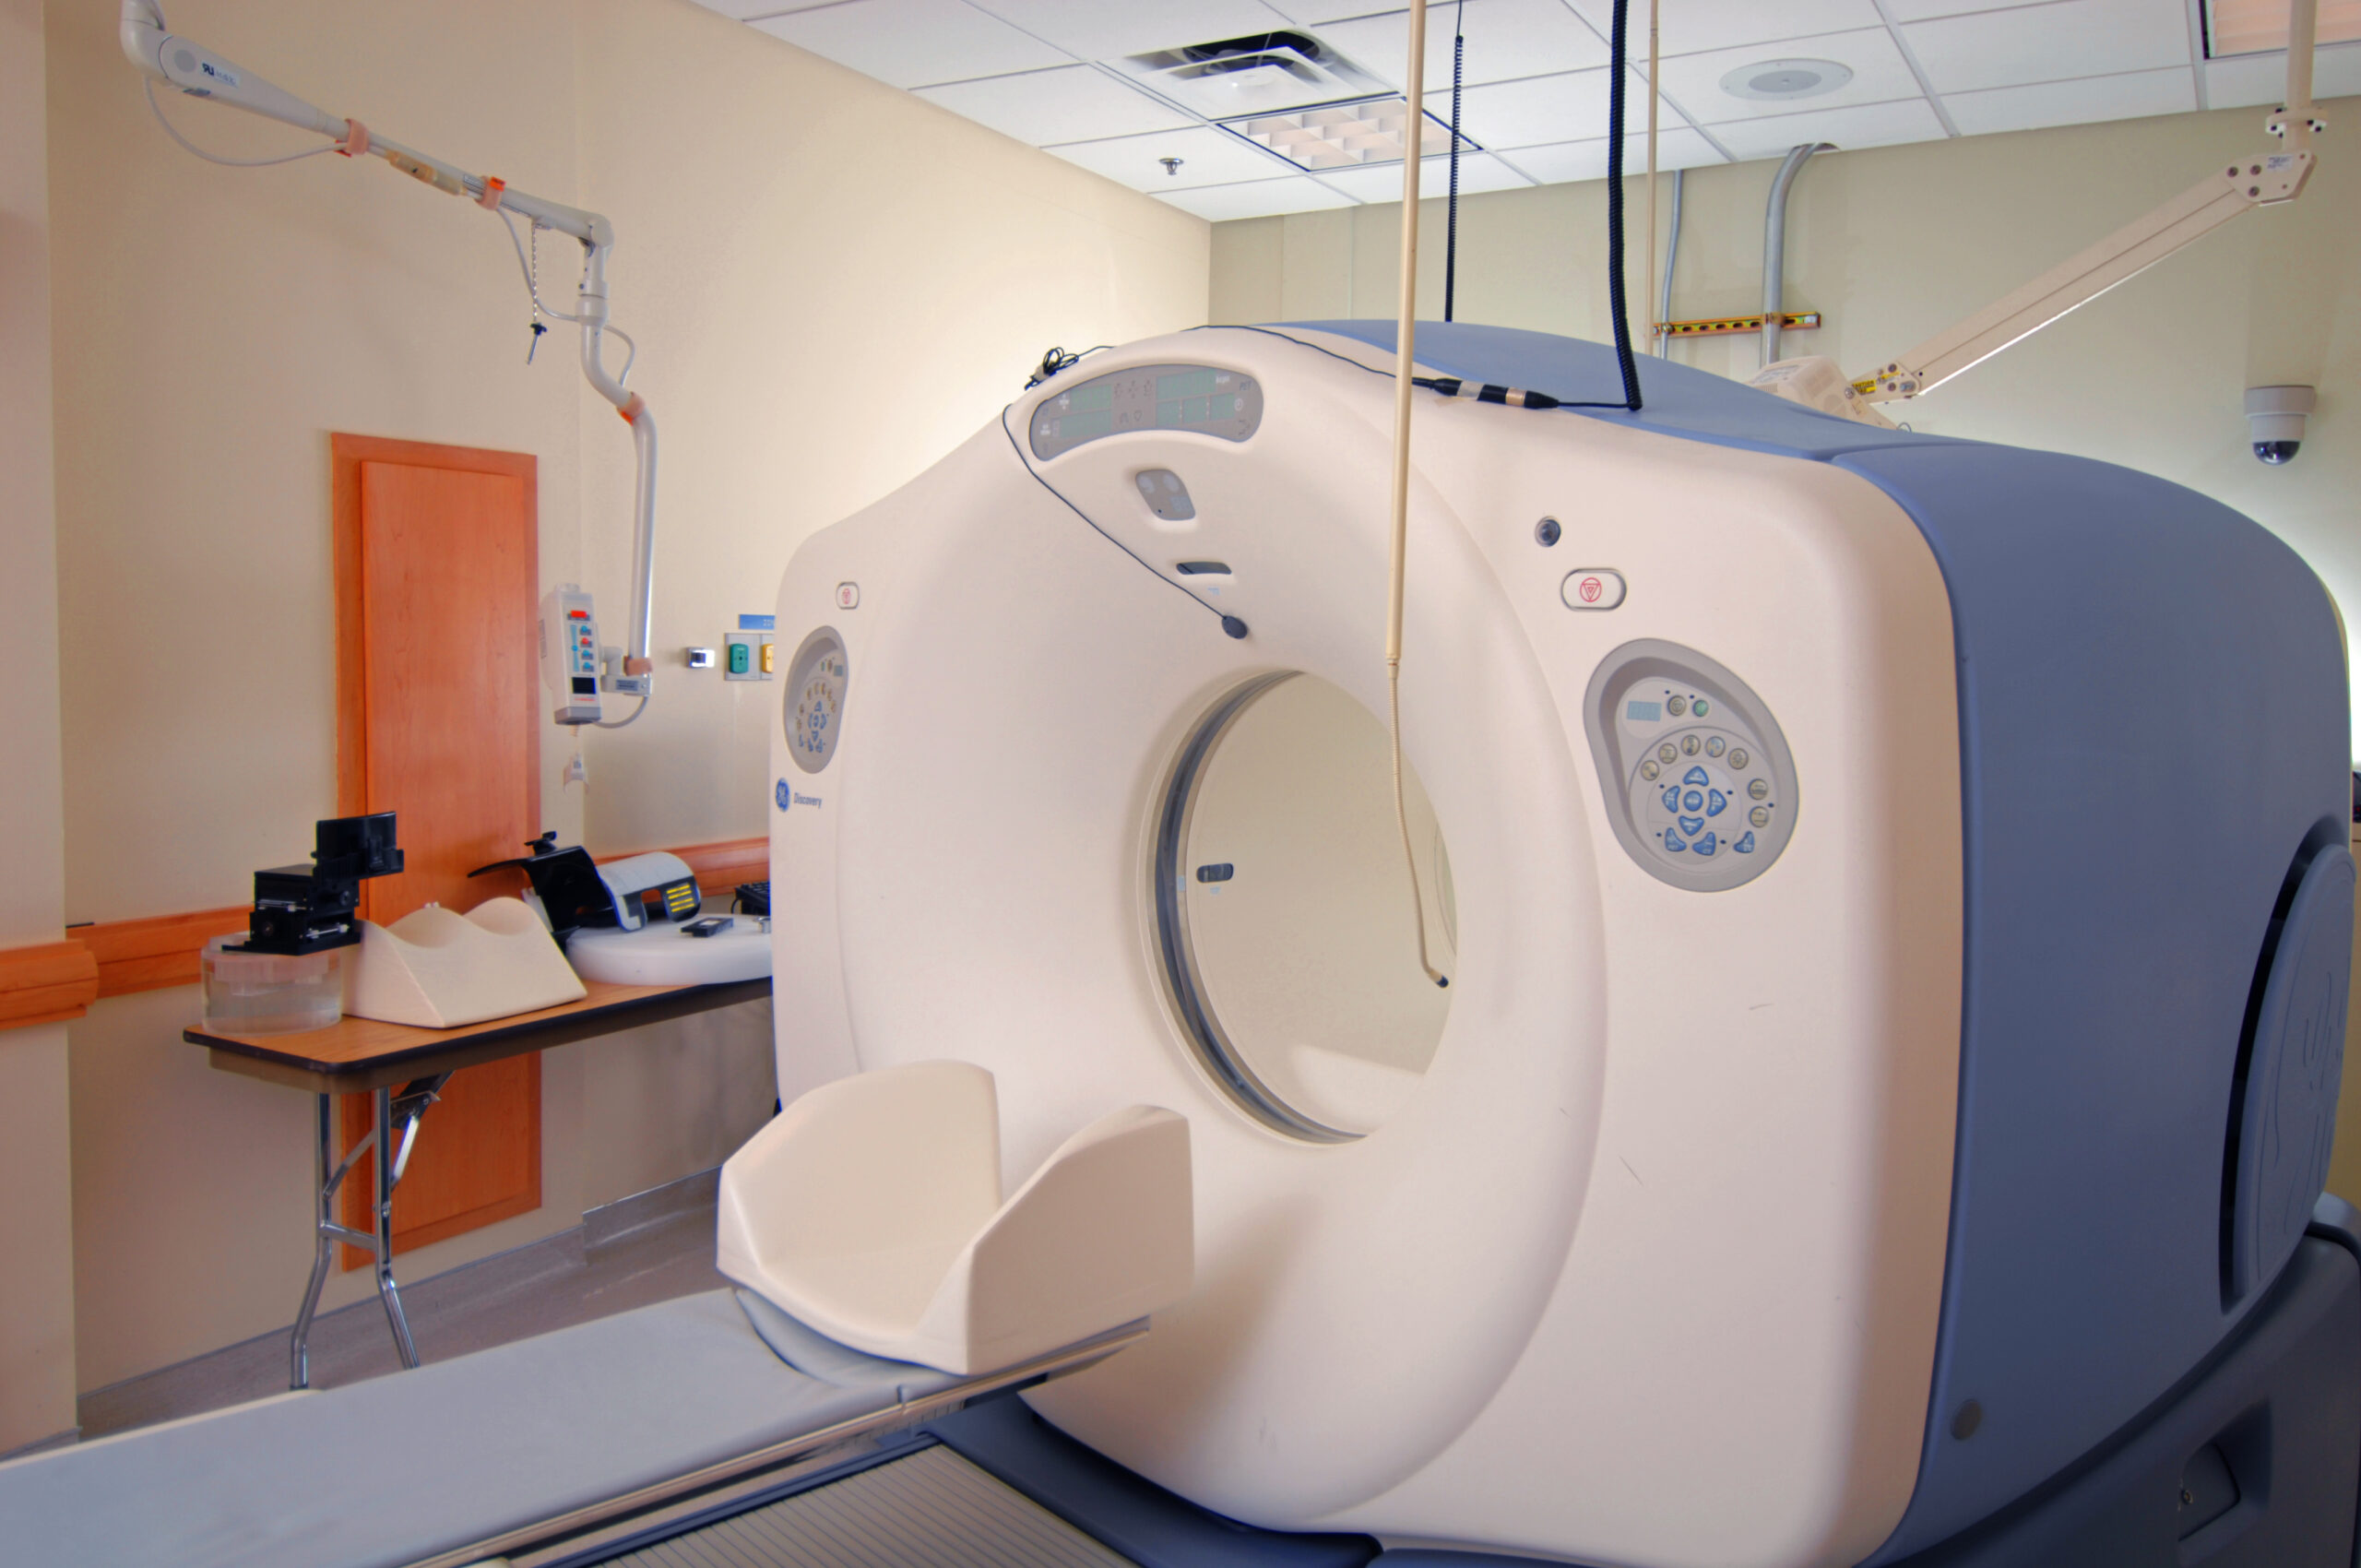 What should I do 24 hours before a PET scan?